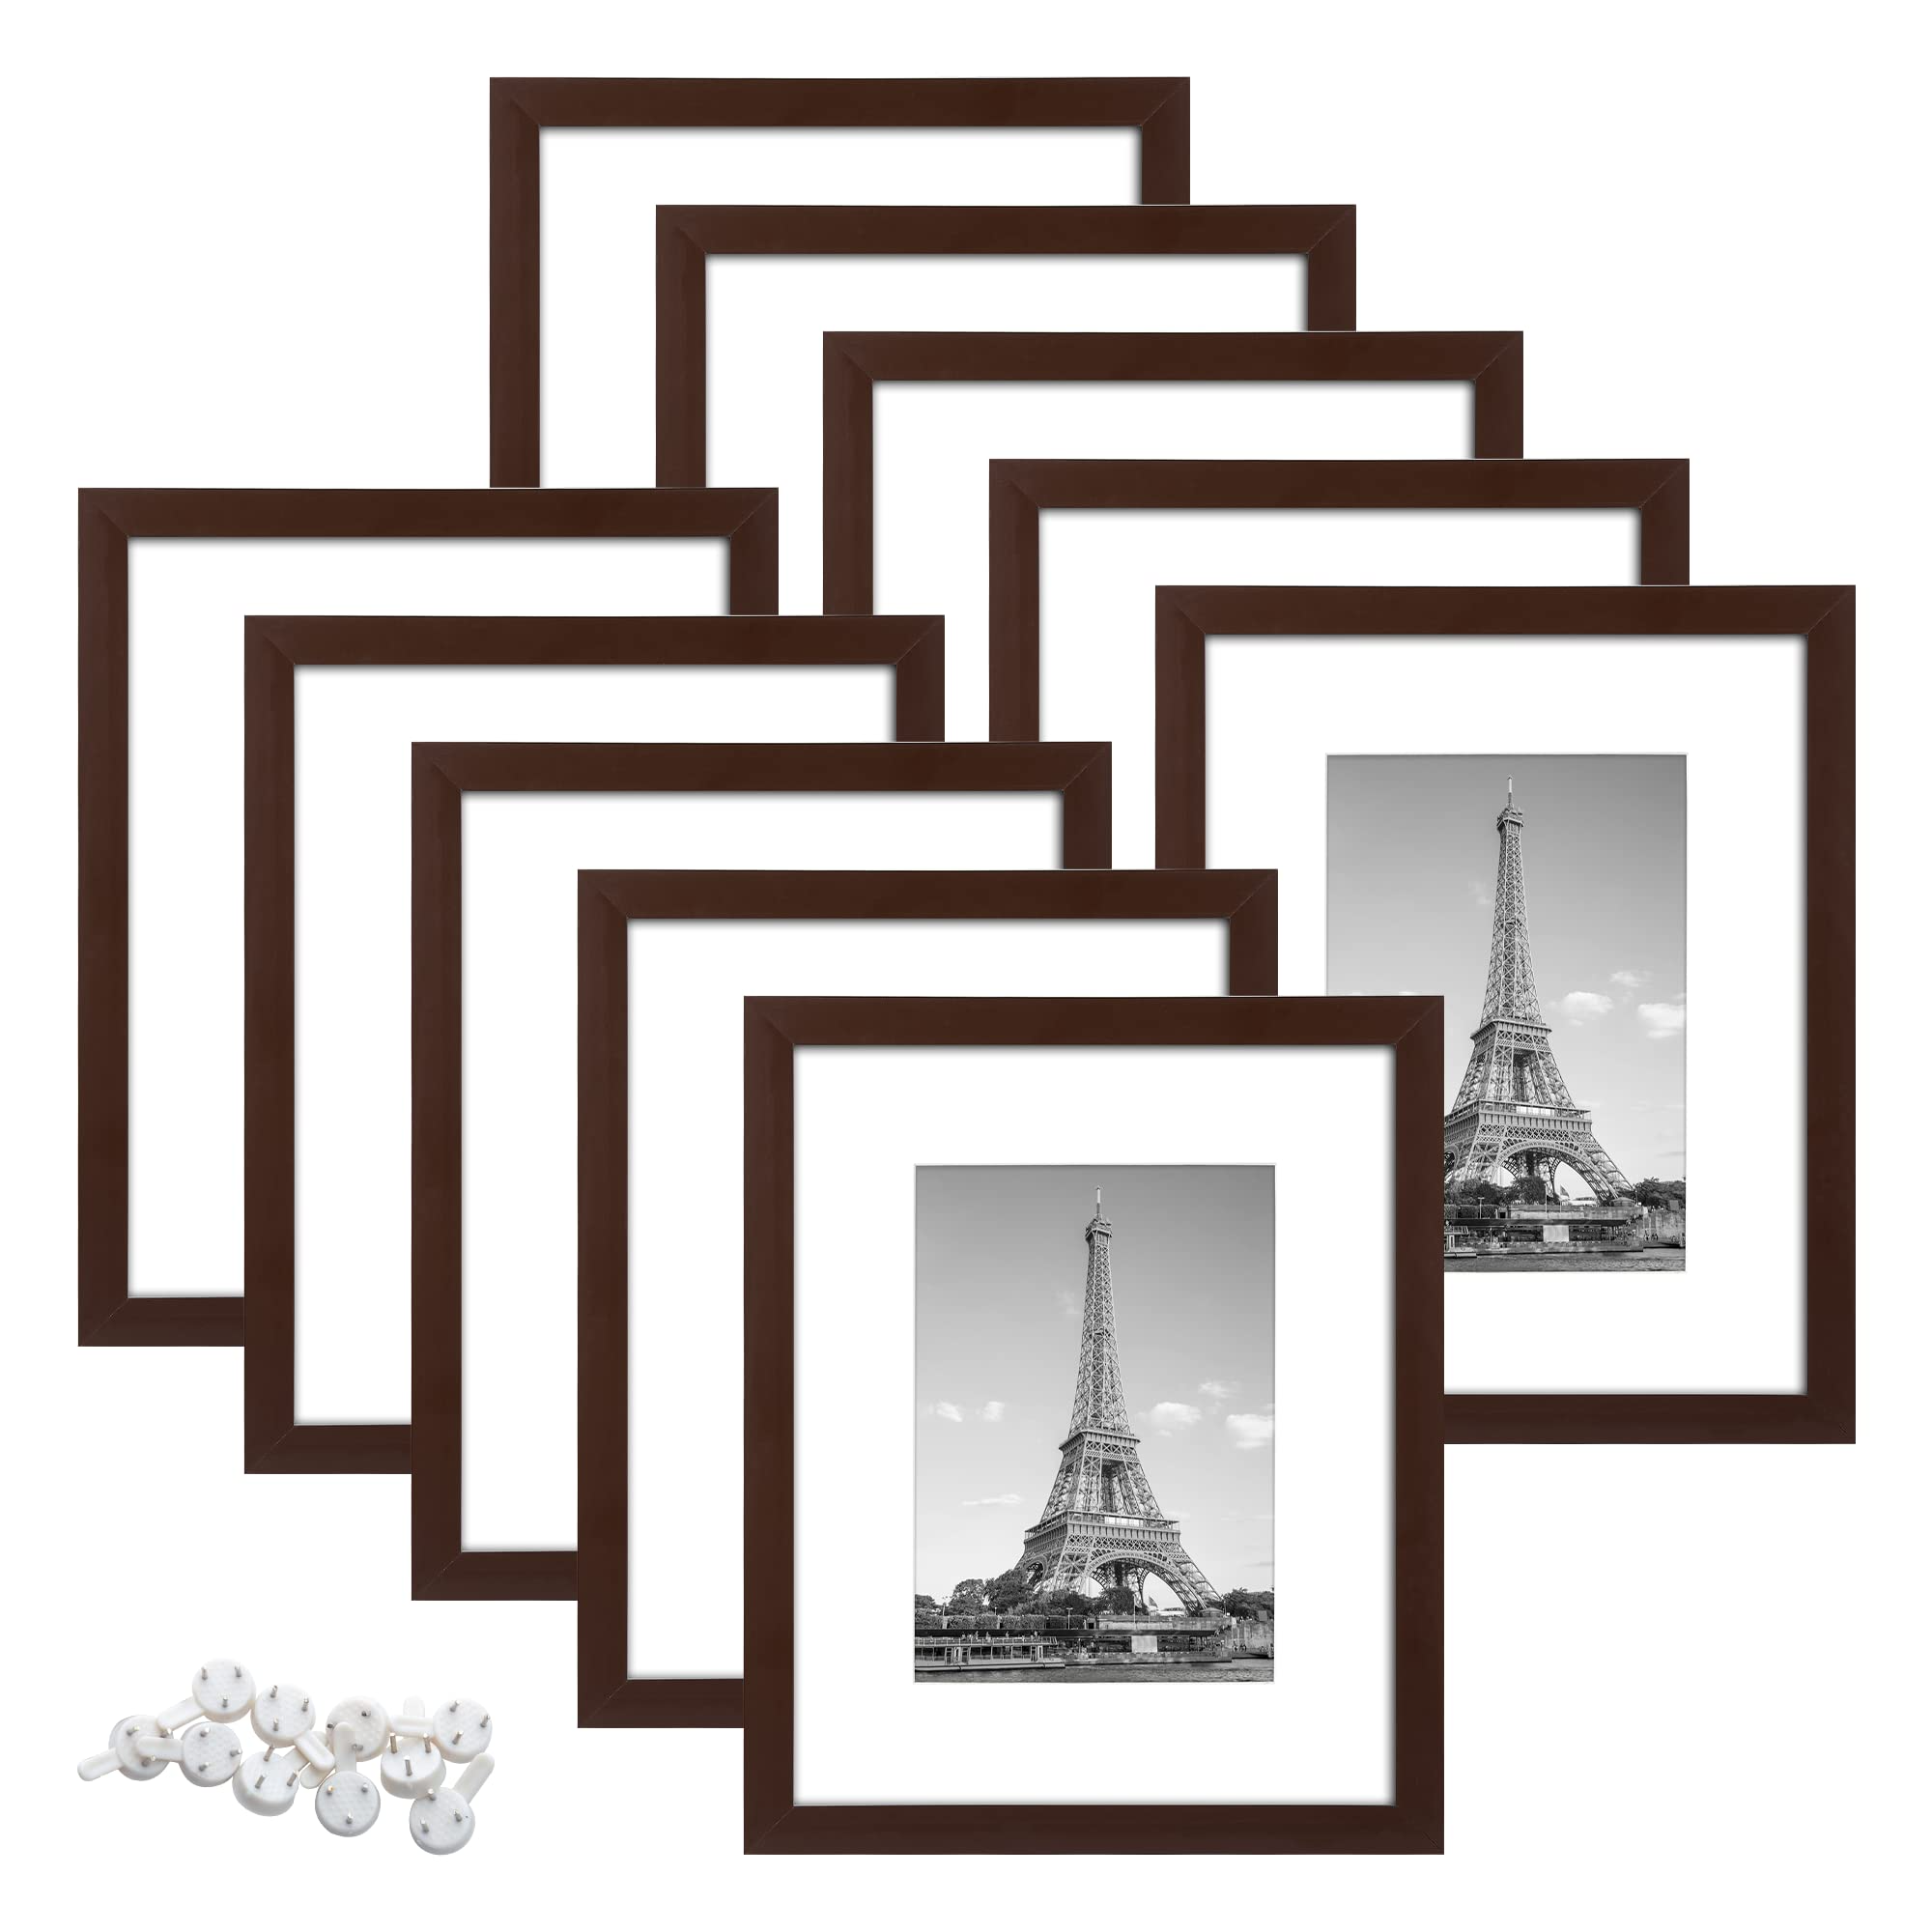 upsimples Picture Frame Set of 5, Display Pictures 8x10 with Mat or 11x14  Without Mat, Wall Gallery Photo Frames, White